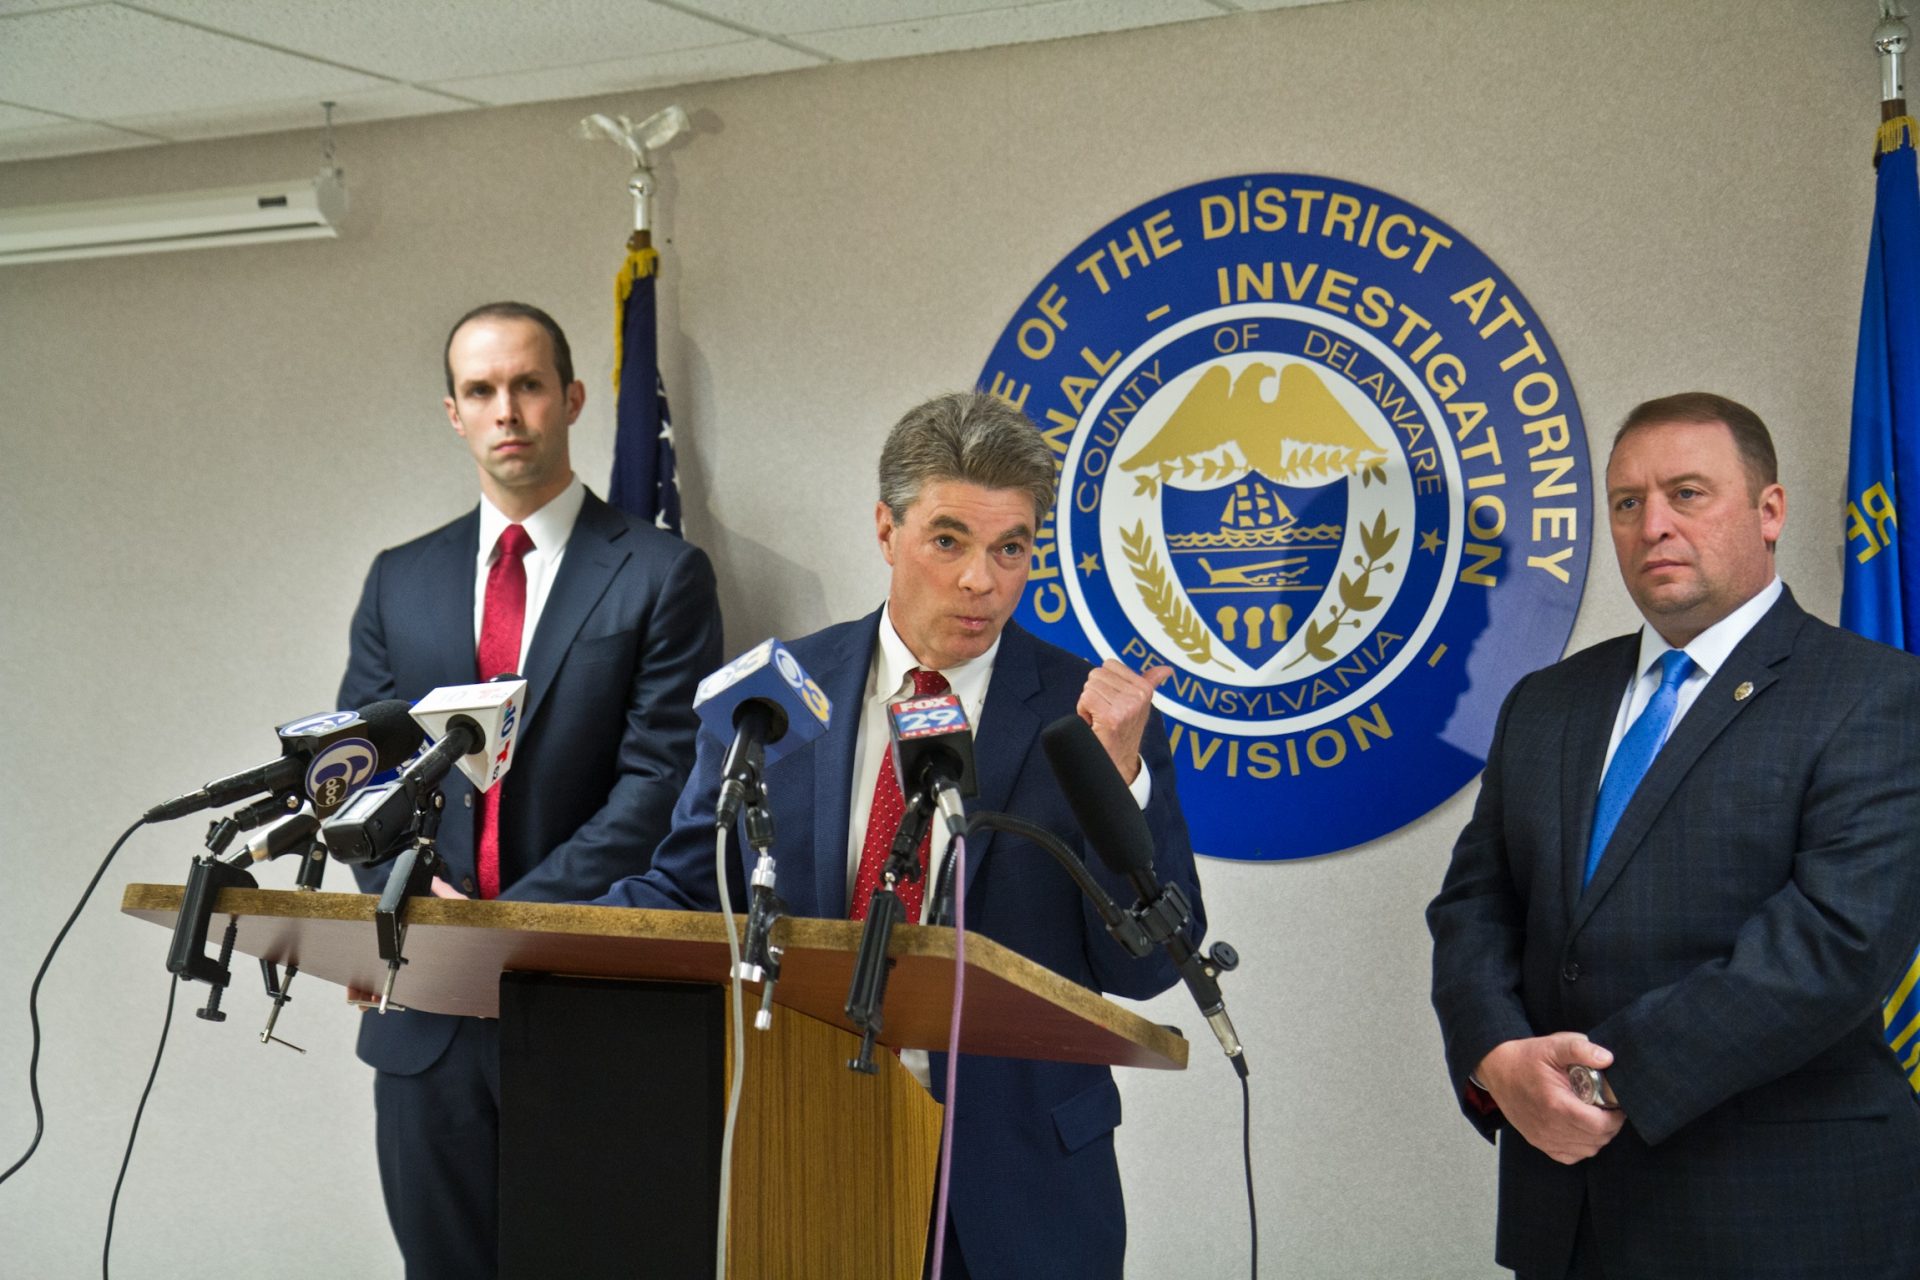 Delaware County District Attorney Jack Stollsteimer announces the dismissal of 1992 shoplifting charges against David Sheppard, who has been serving 25 years in prison